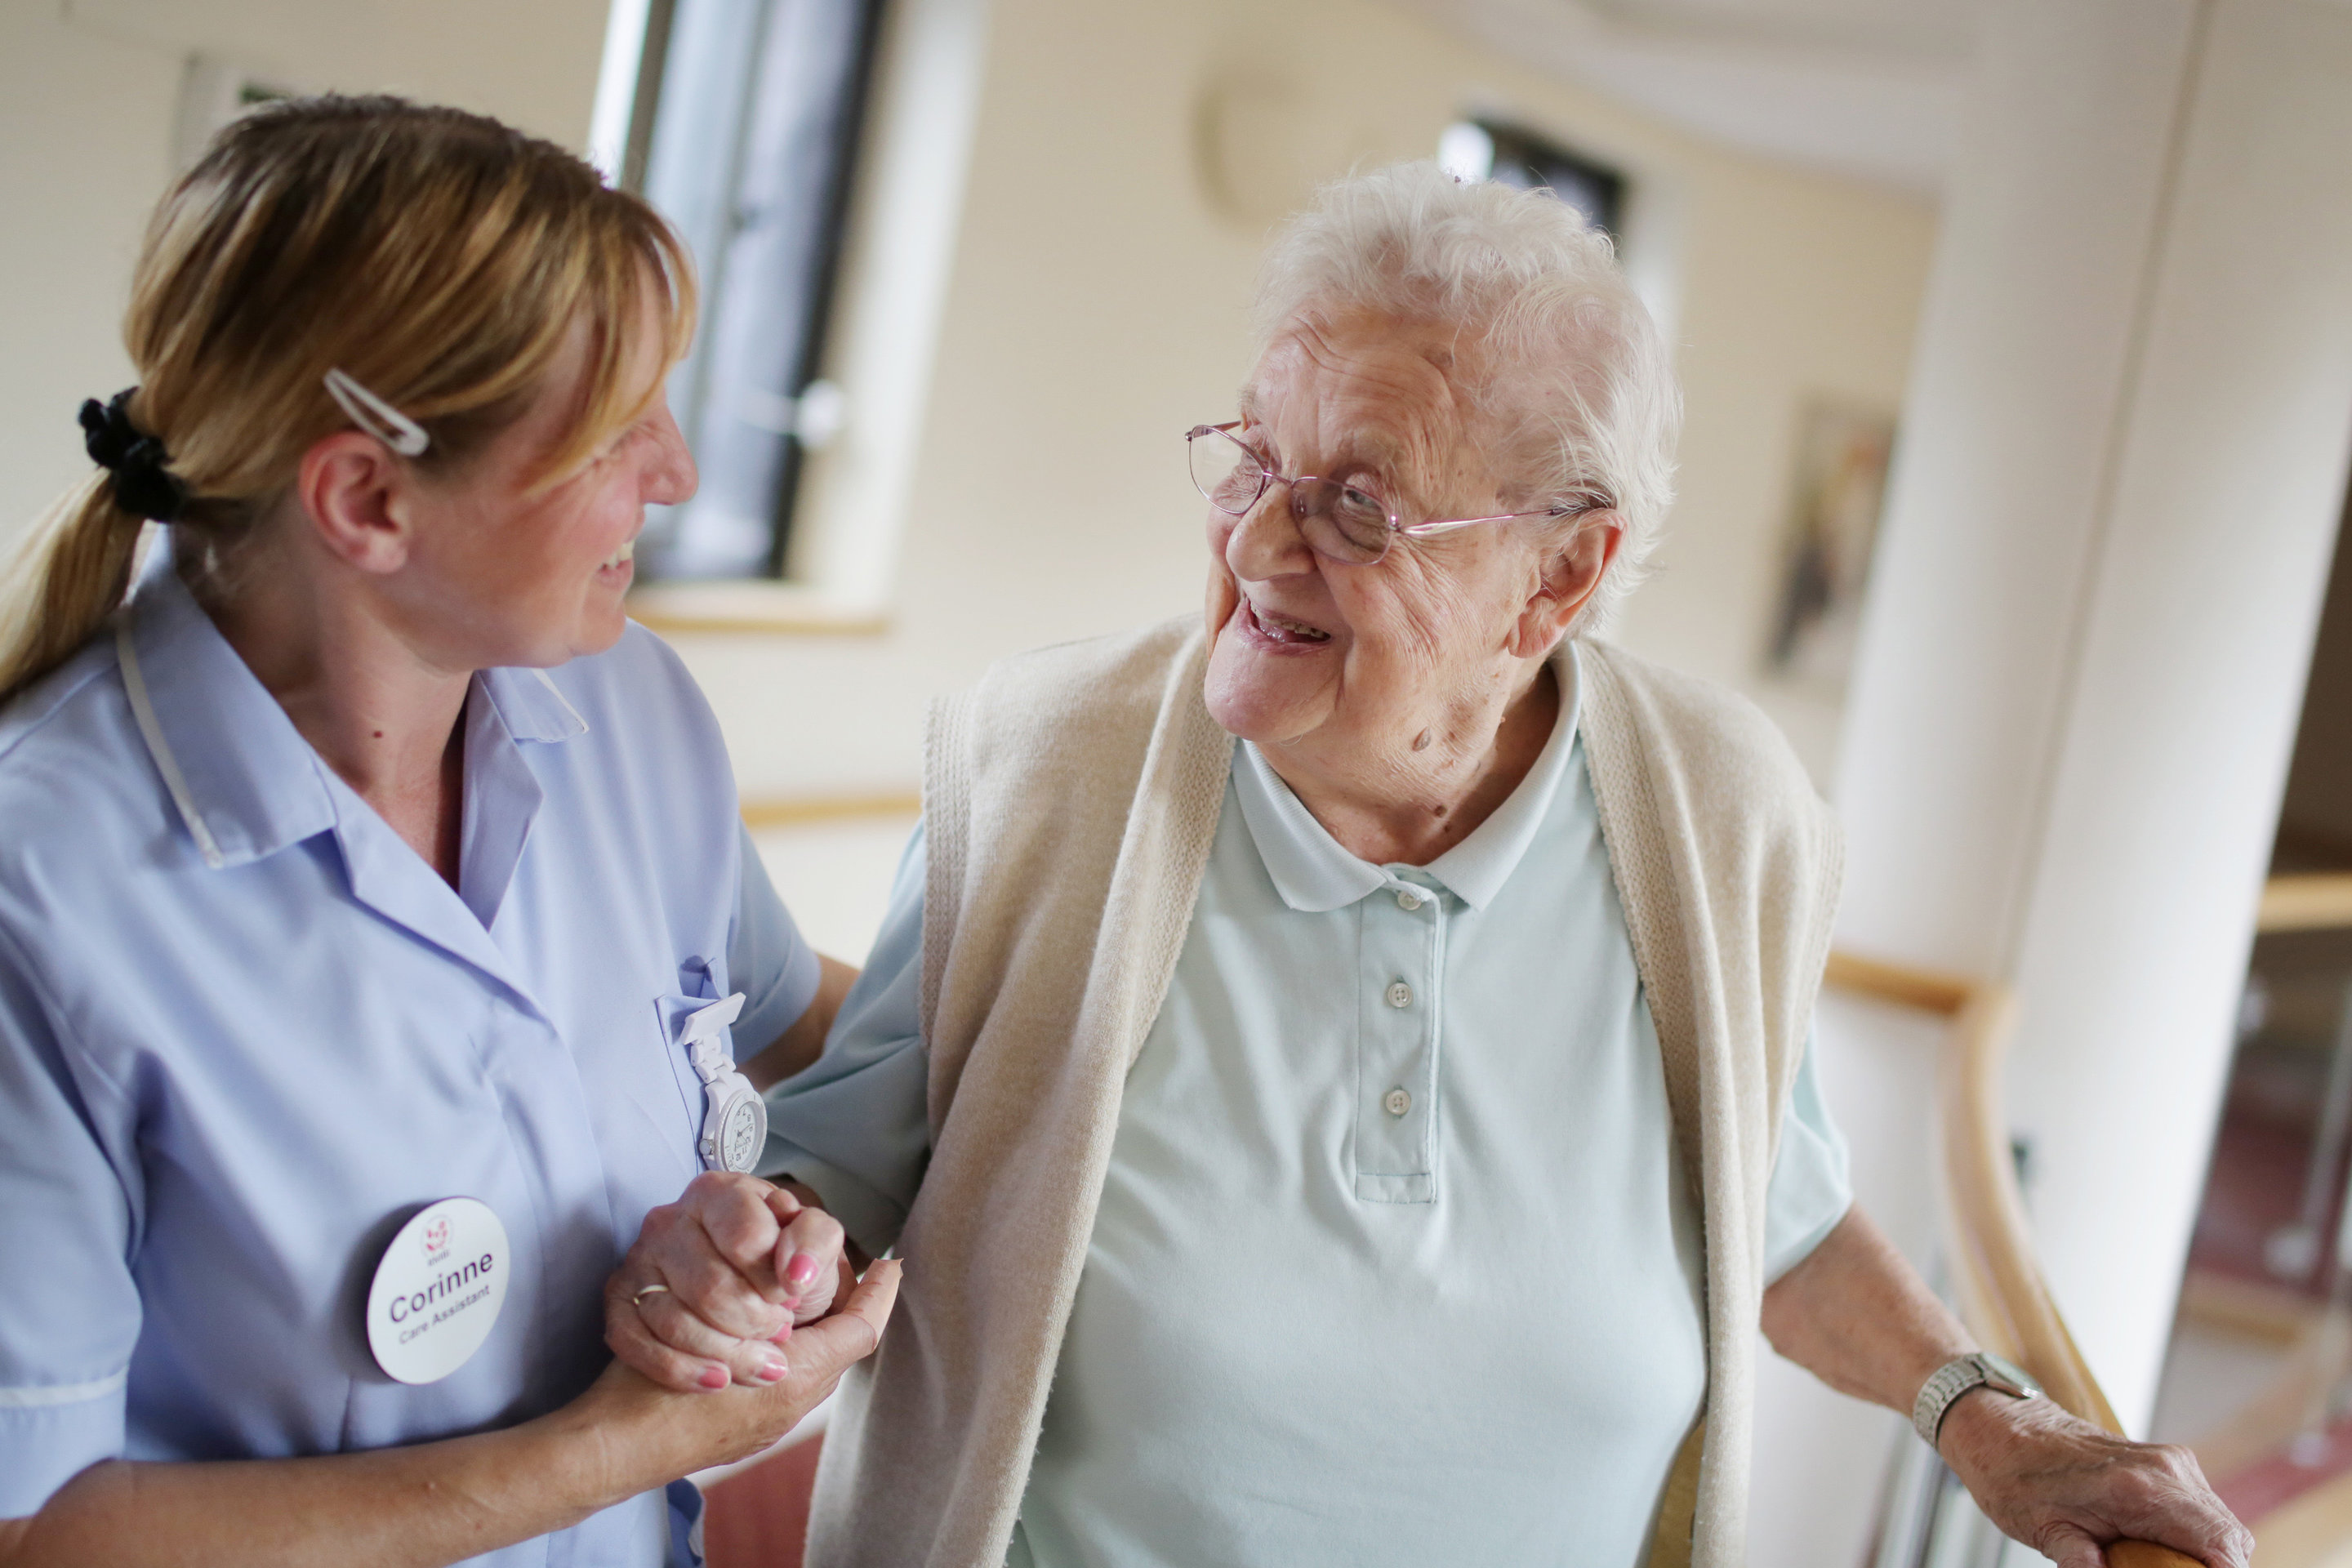 Care assistant jobs in care homes in london